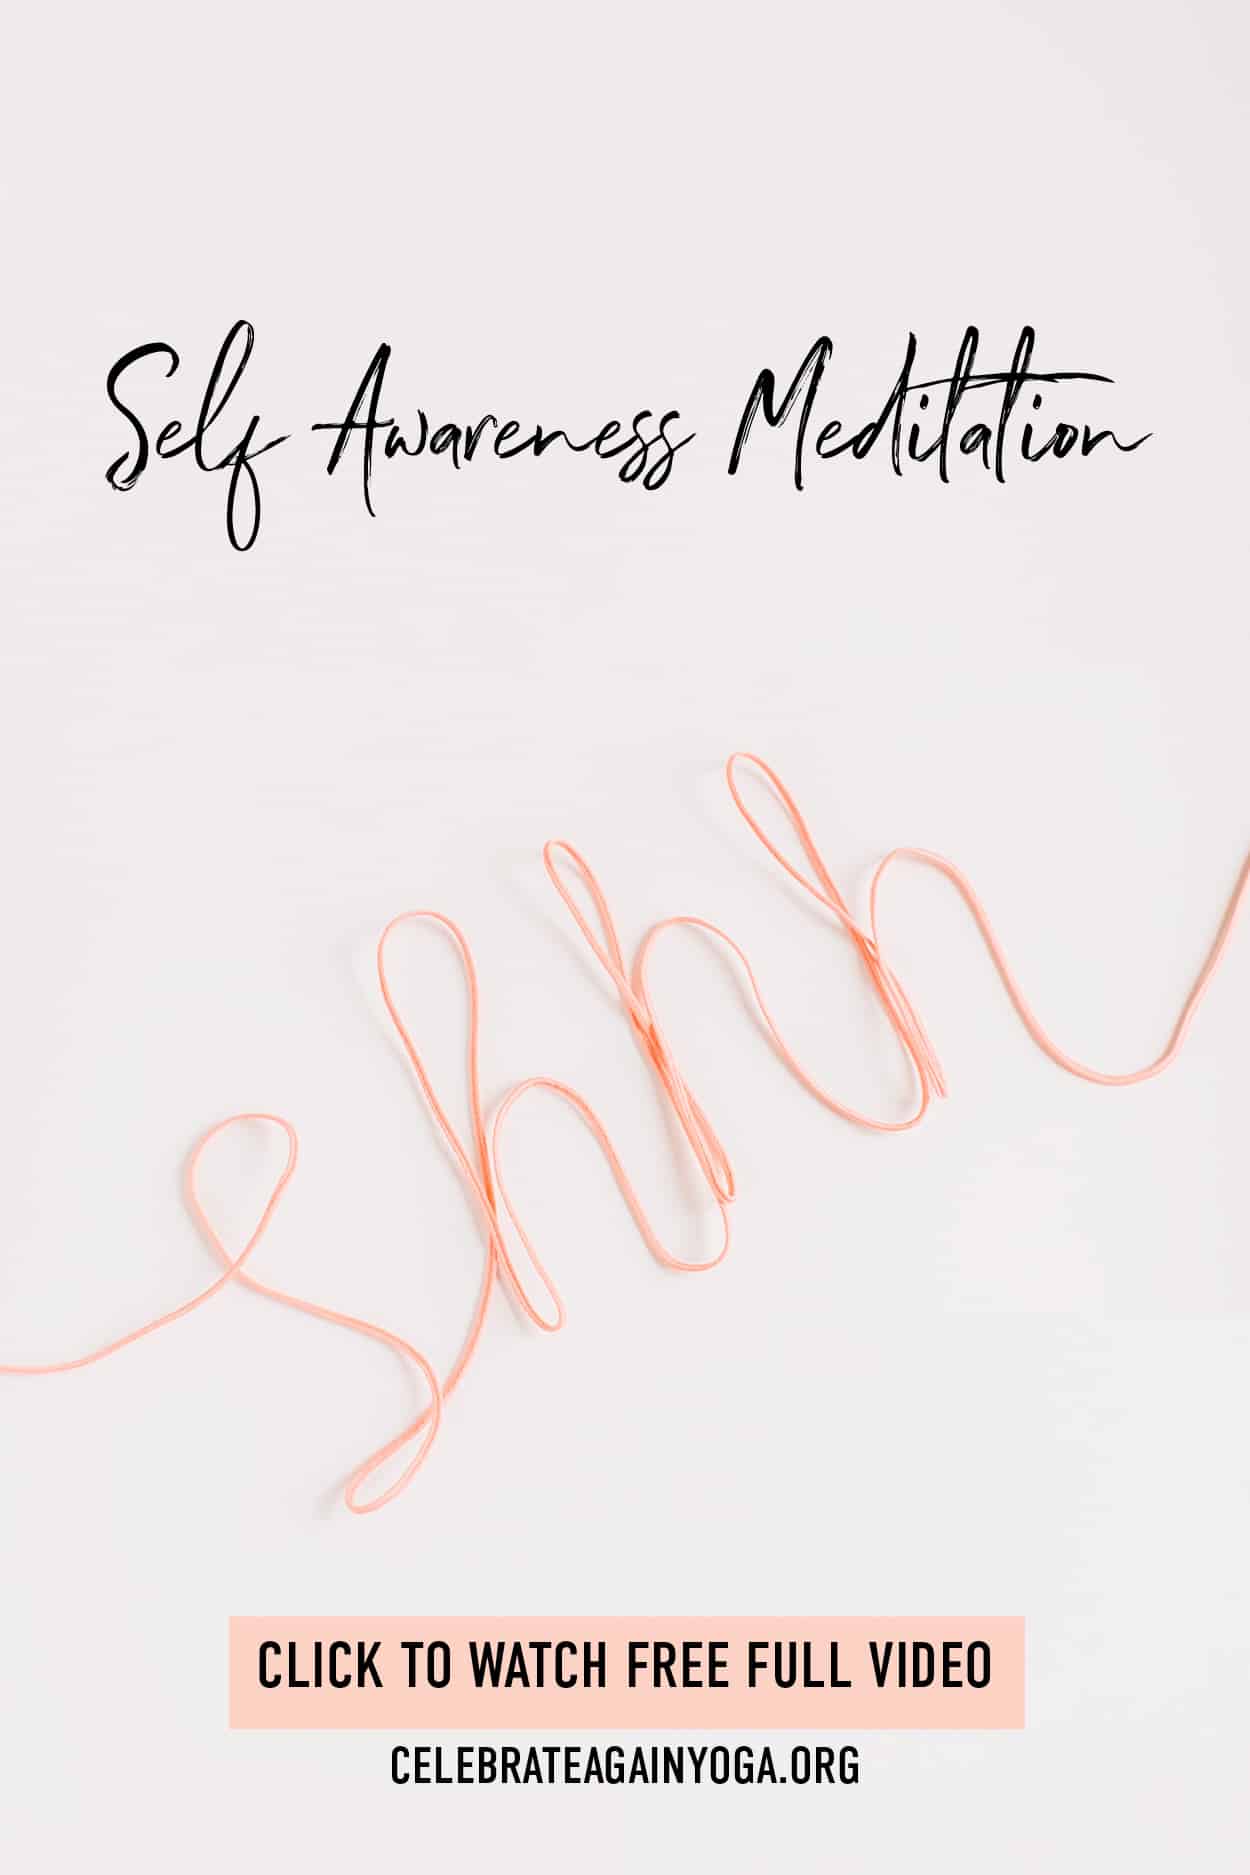 "self awareness meditaiton click to watch full video" photo of "shhhh" in pink piped letters